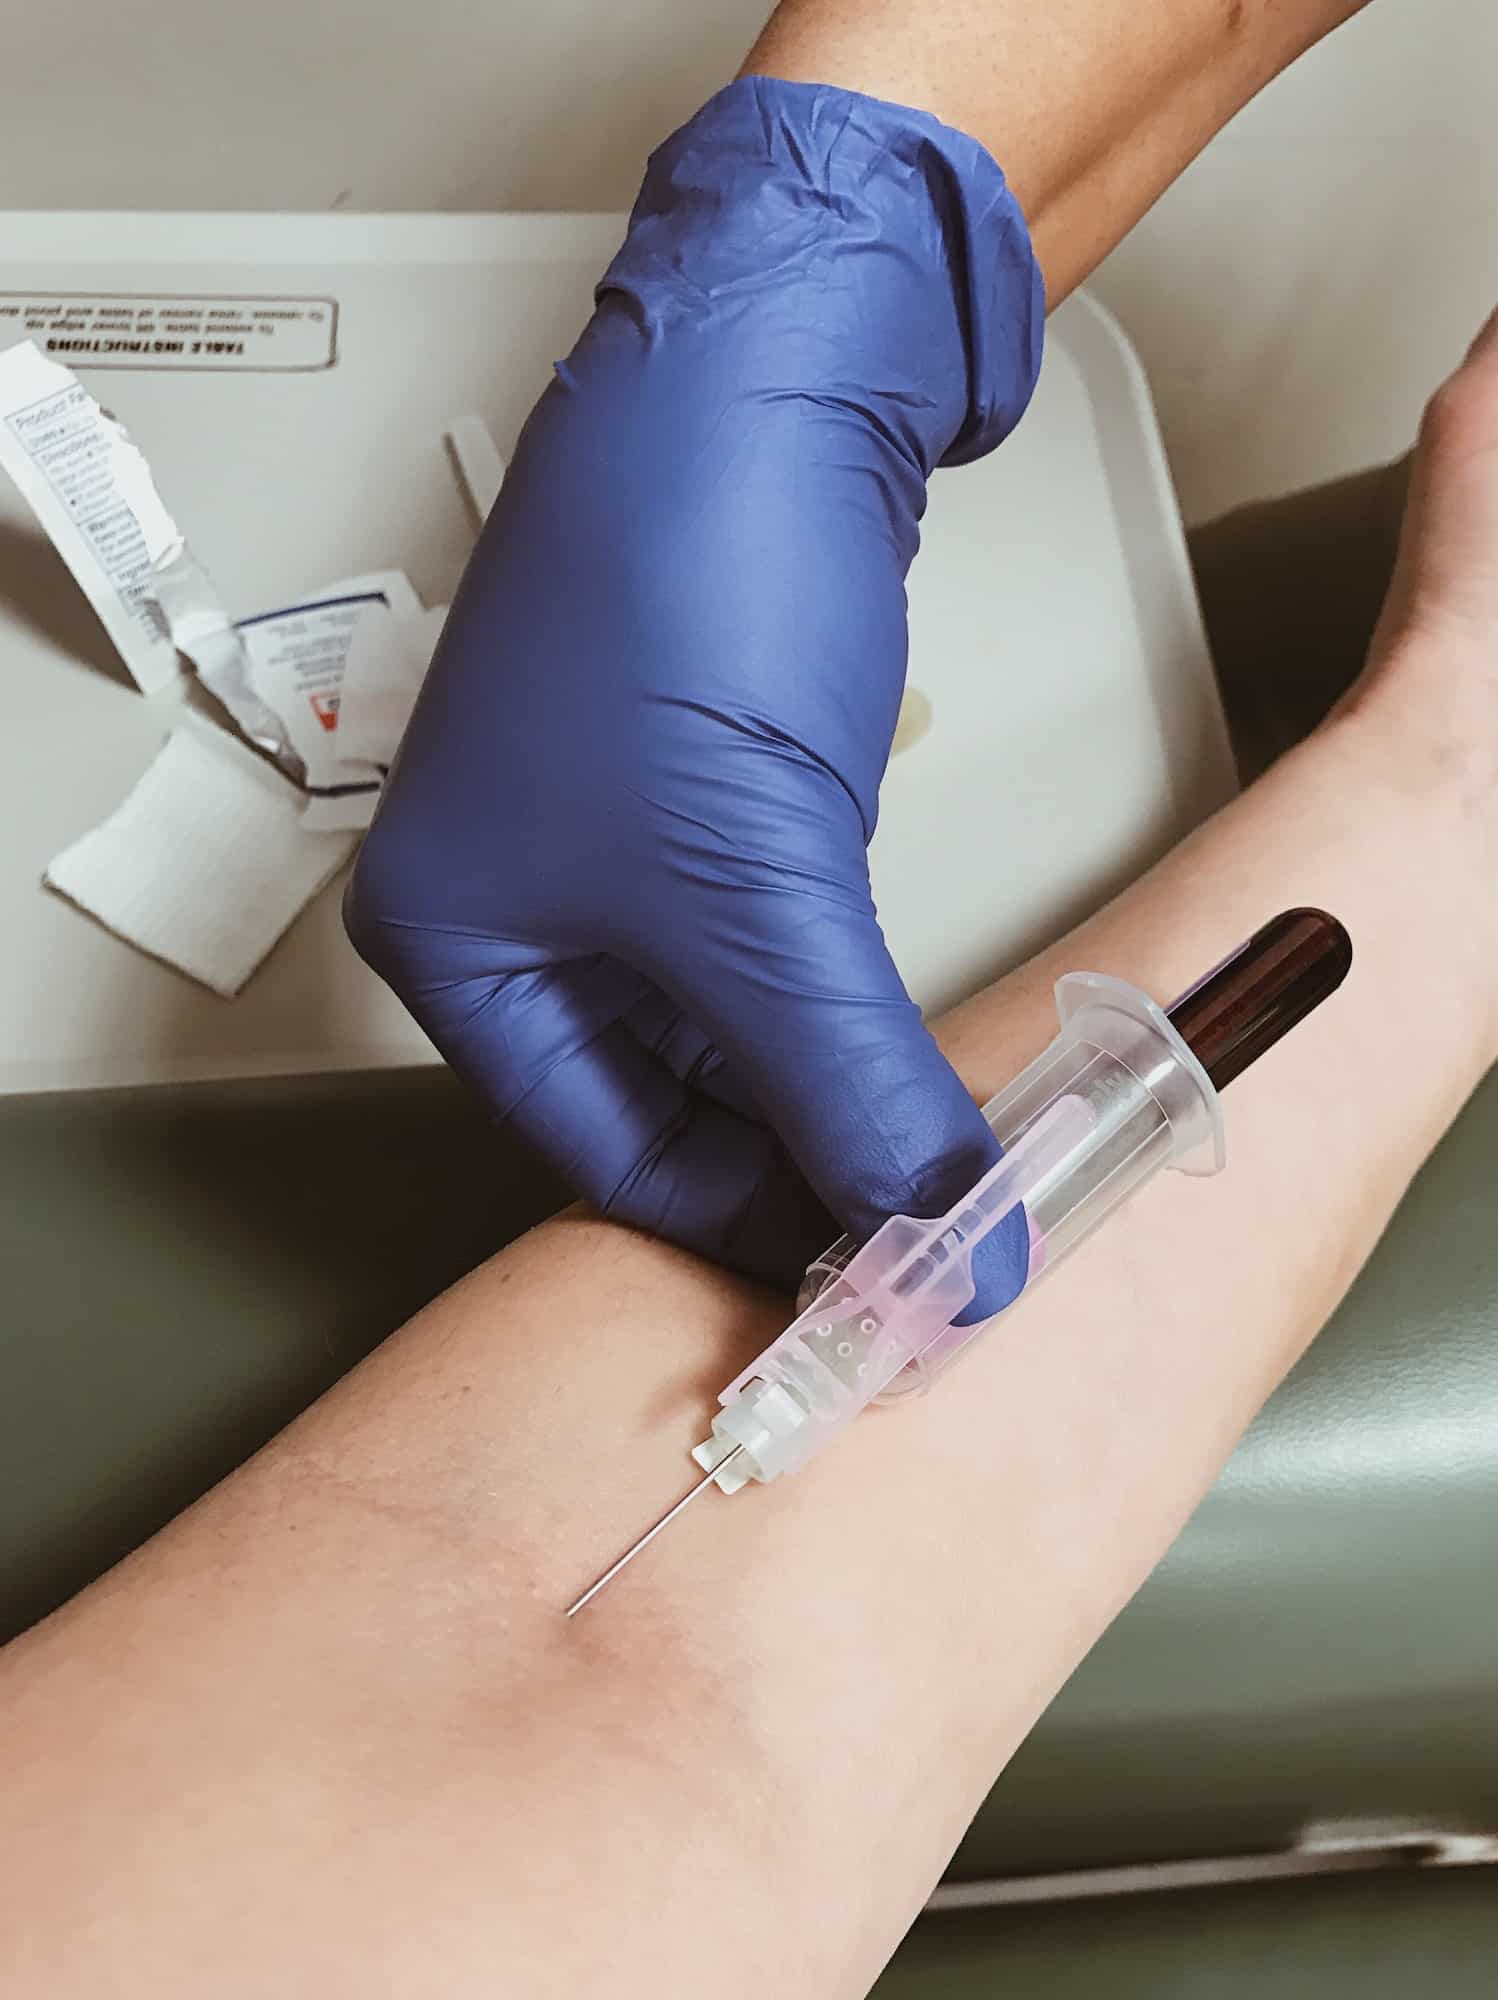 A blue gloved medical nurse is drawing a blood sample for a patient’s health analysis